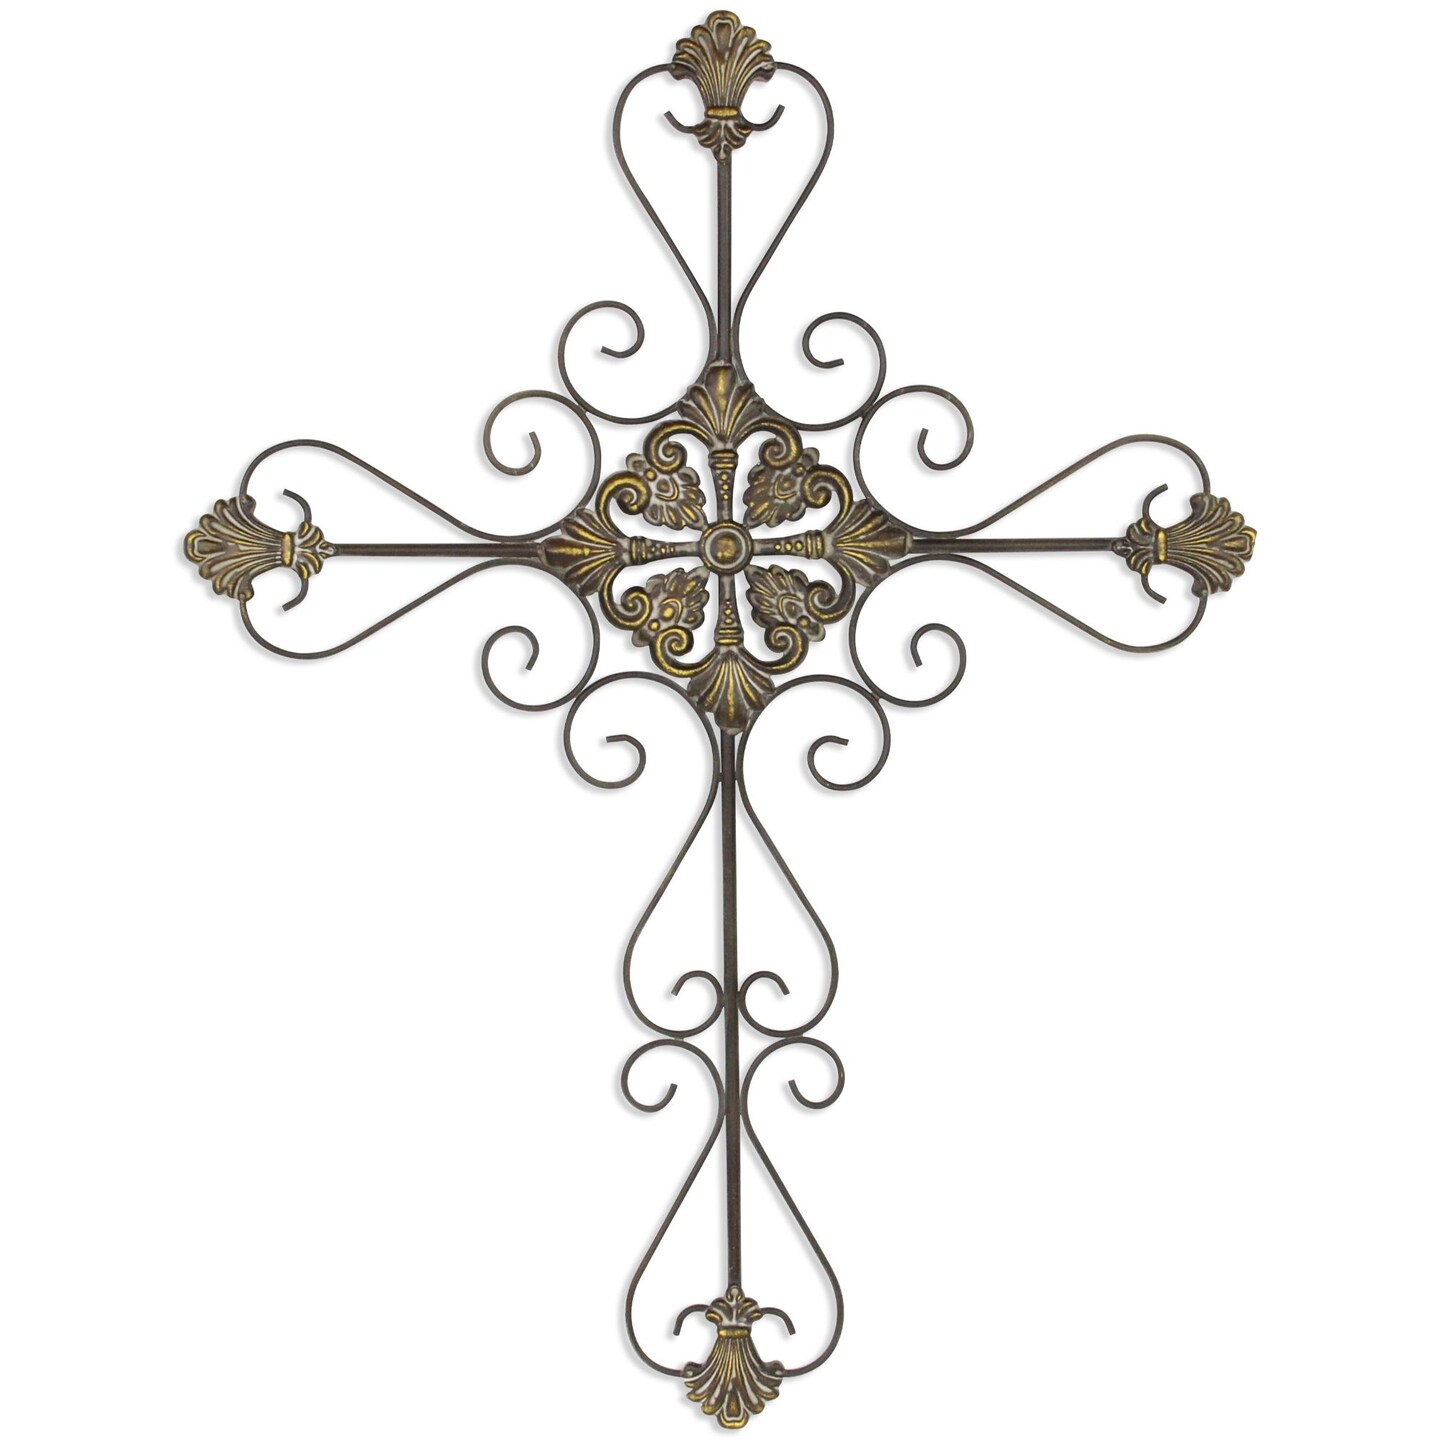 Beautiful Crosses for Your Home Decor